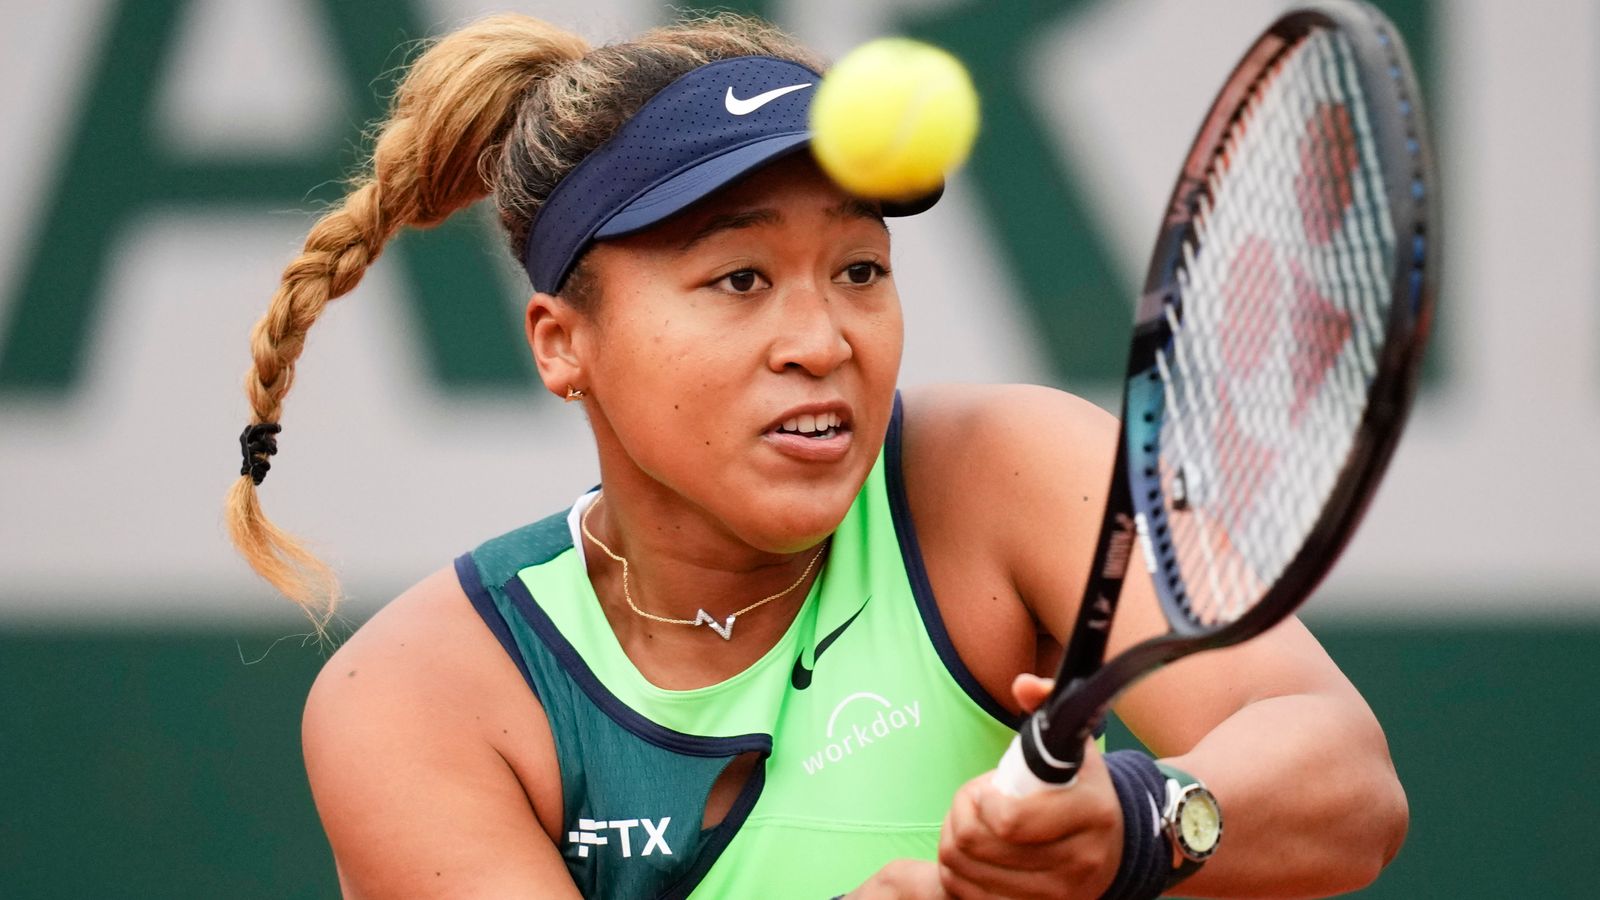 Naomi Osaka knocked out of French Open in first round